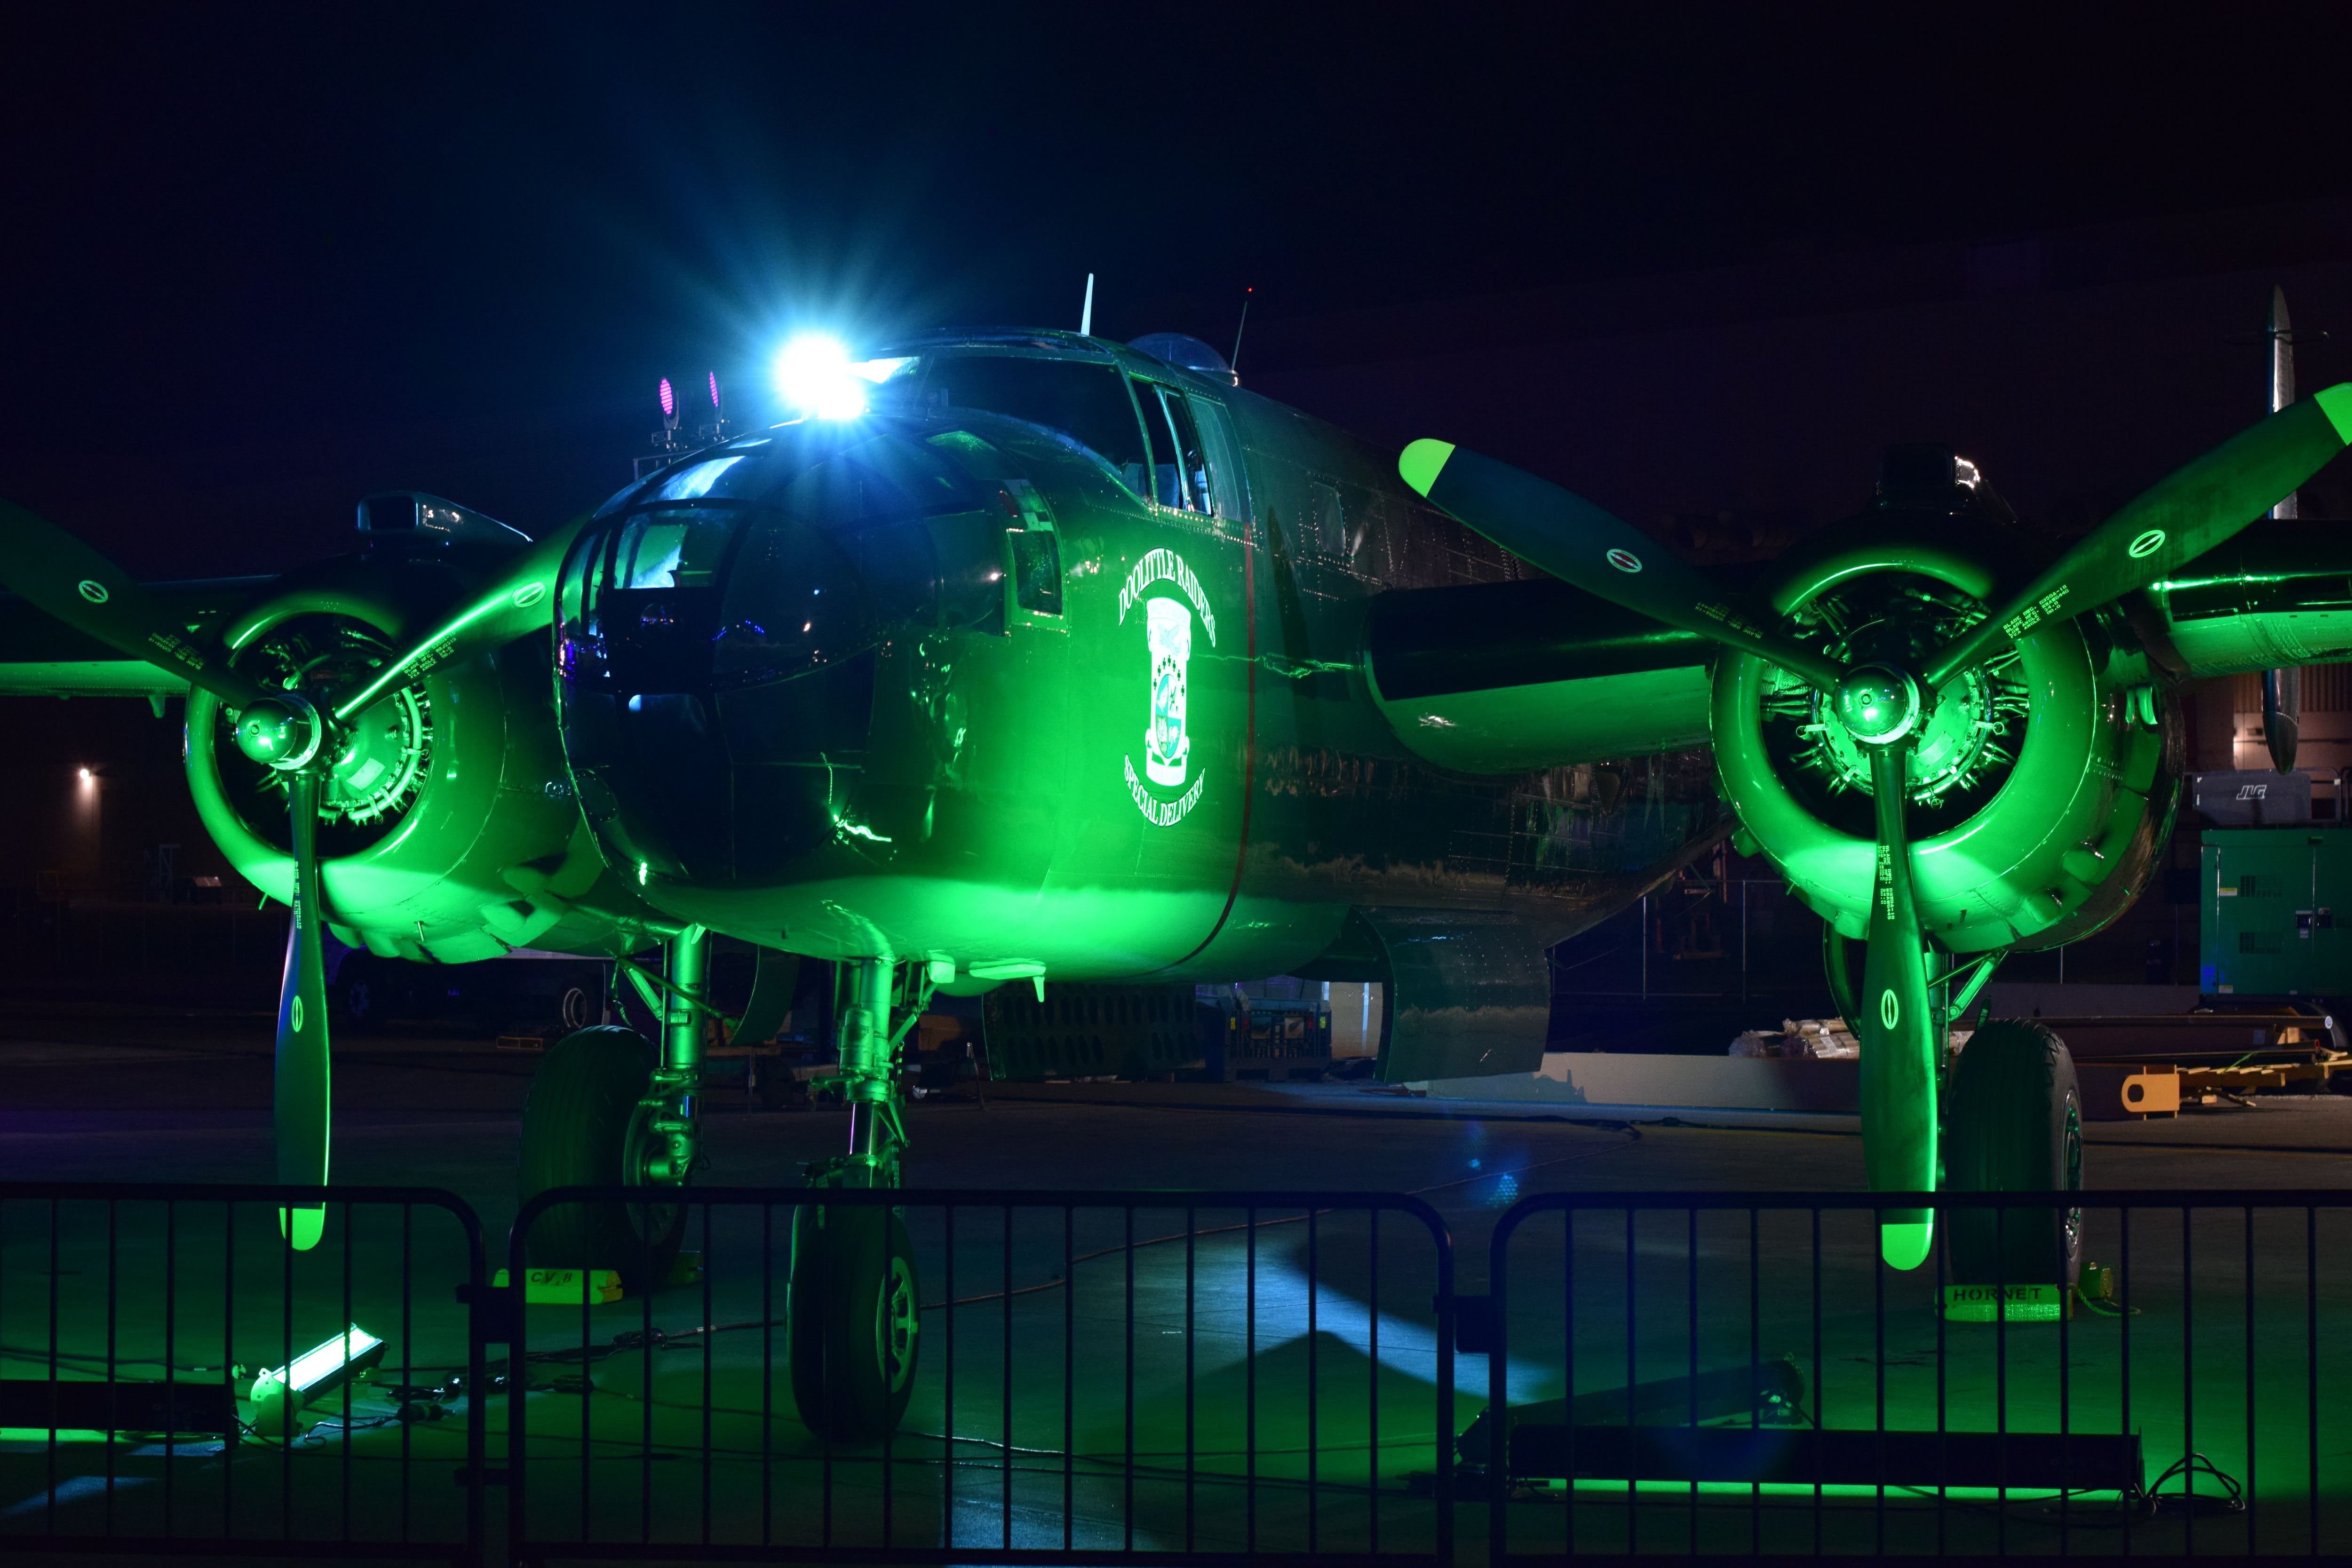 A nighttime shot of a World War II-era B-25 Mitchell after the B-21 rollout ceremony. The Doolittle Raiders flew B-25s of this kind on their daring 1942 raid on Tokyo, Japan. The B-21 Raider was named in honor of the Doolittle Raiders, and the rollout ceremony included tributes to them. (Stephen Losey/Staff)